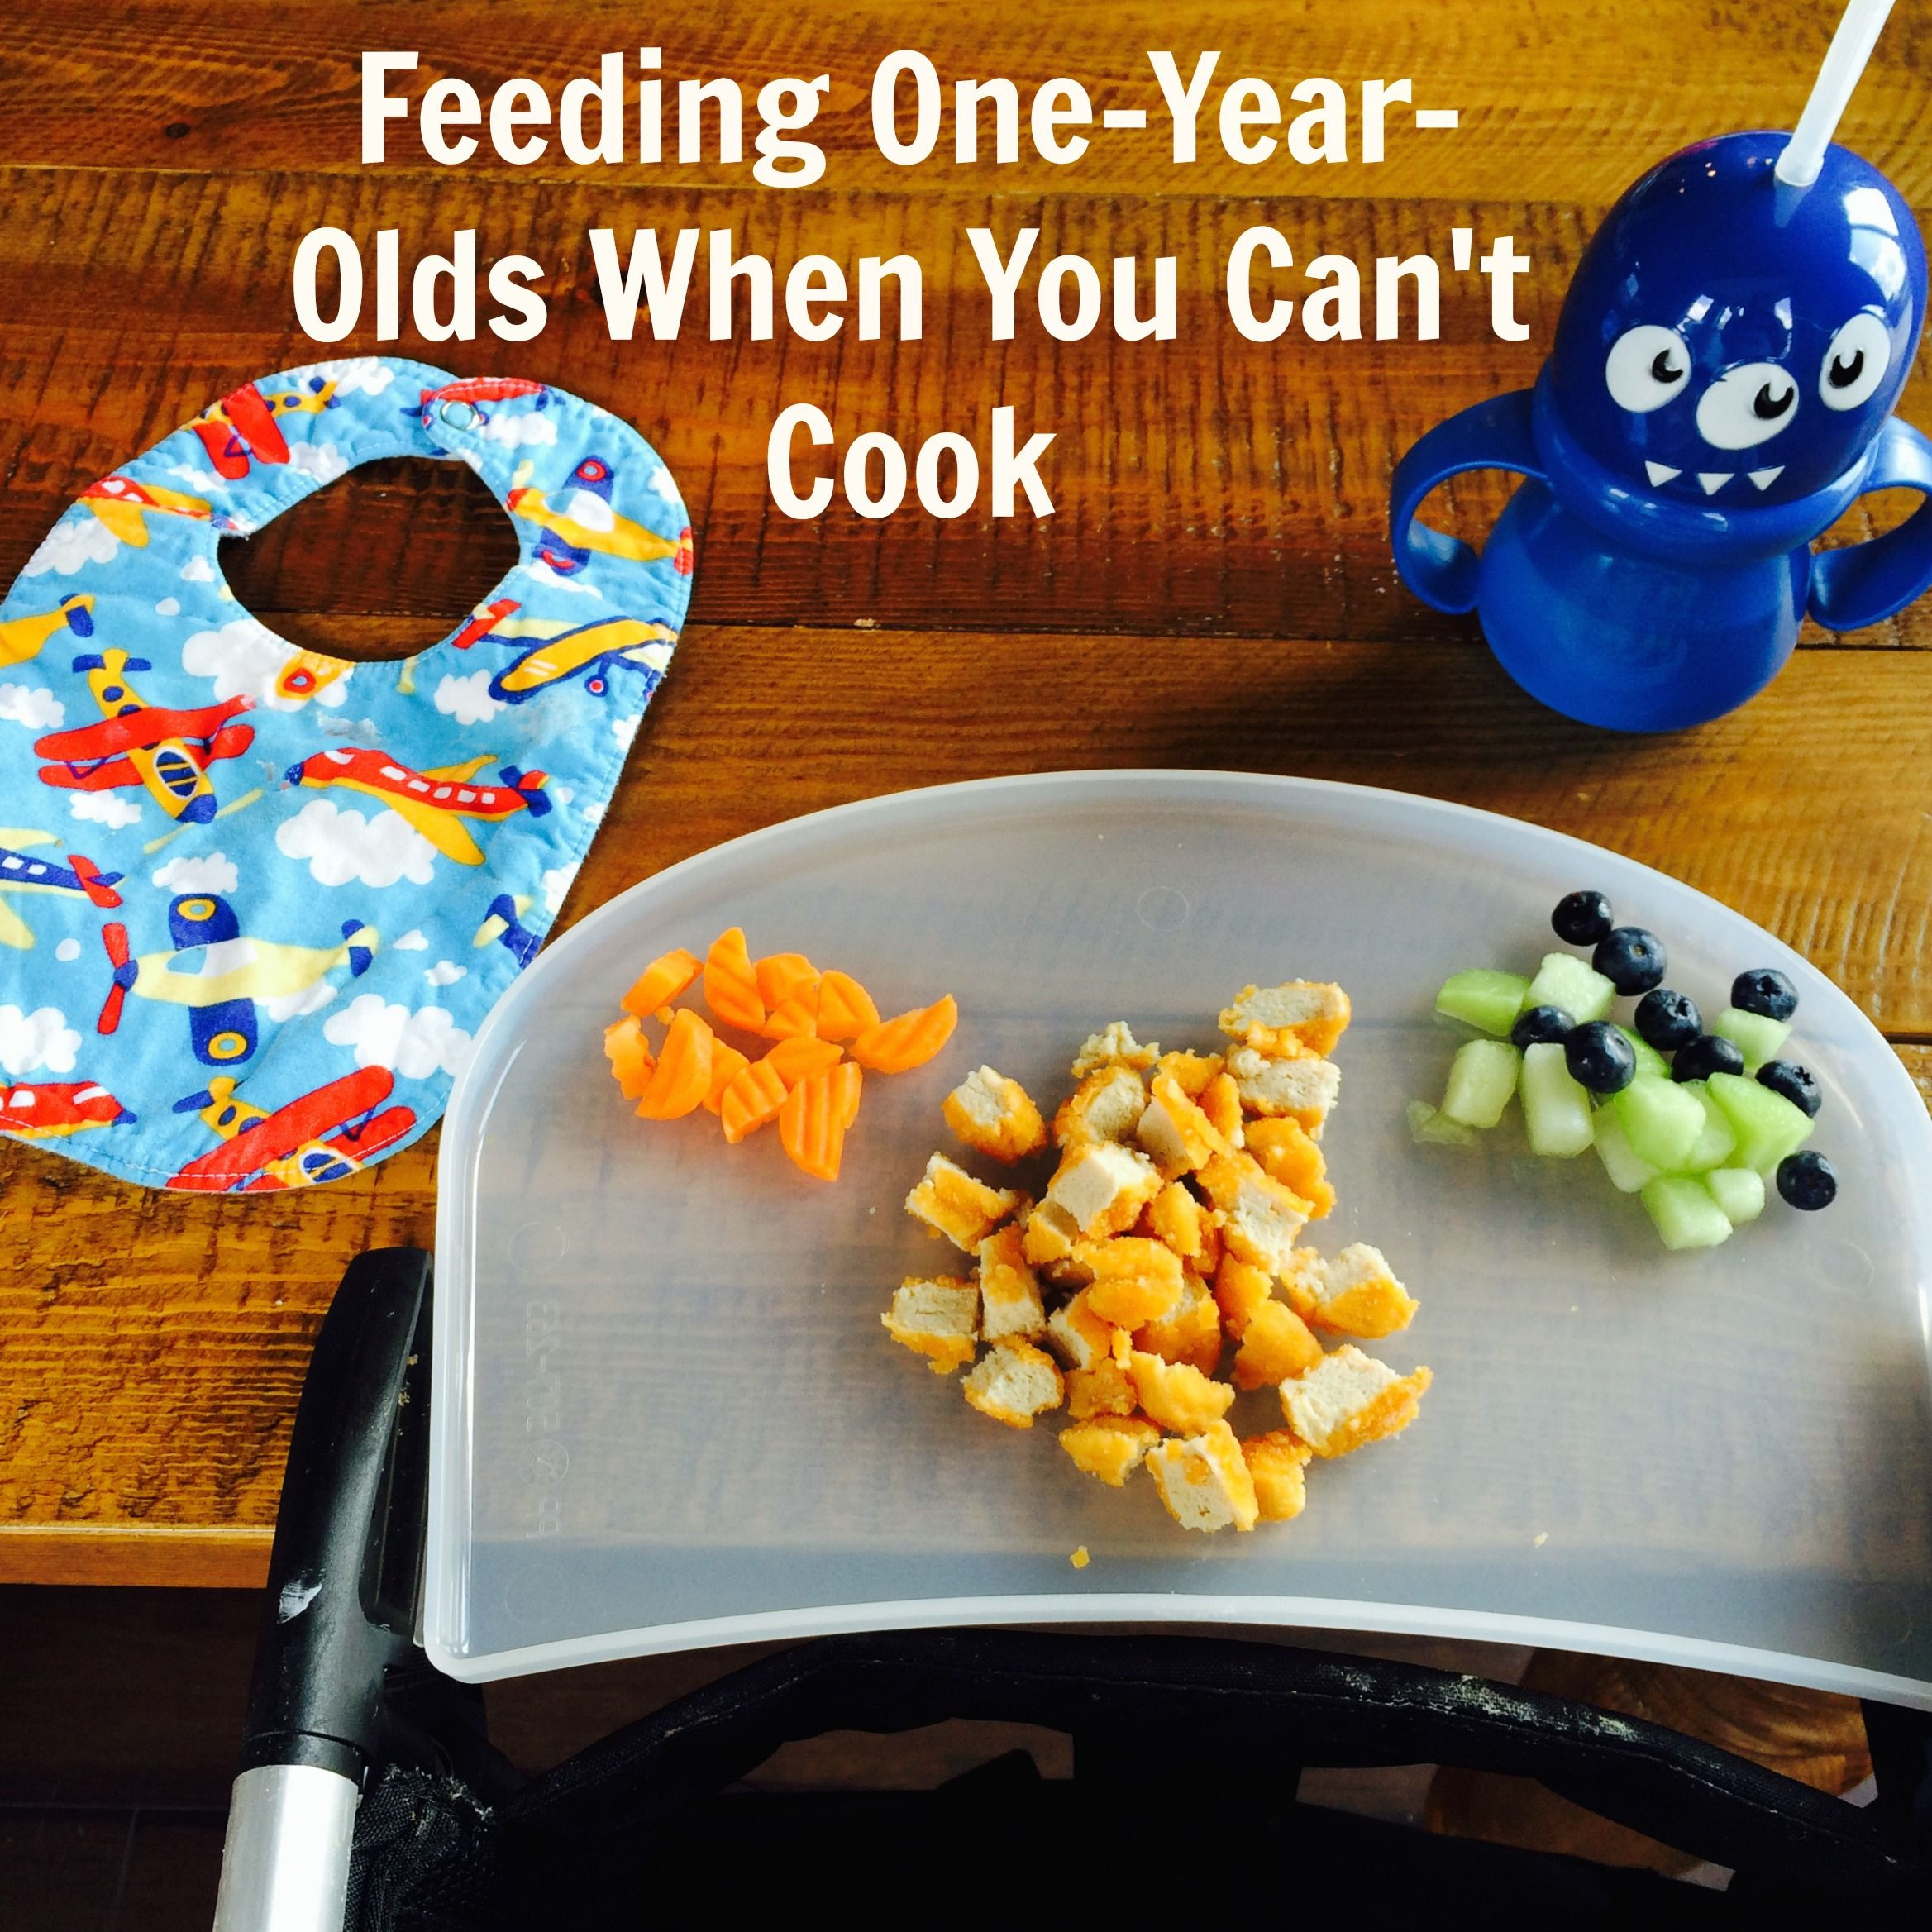 Recipes For One Year Old Baby
 Pin by Heather Barger on Kid nutrition